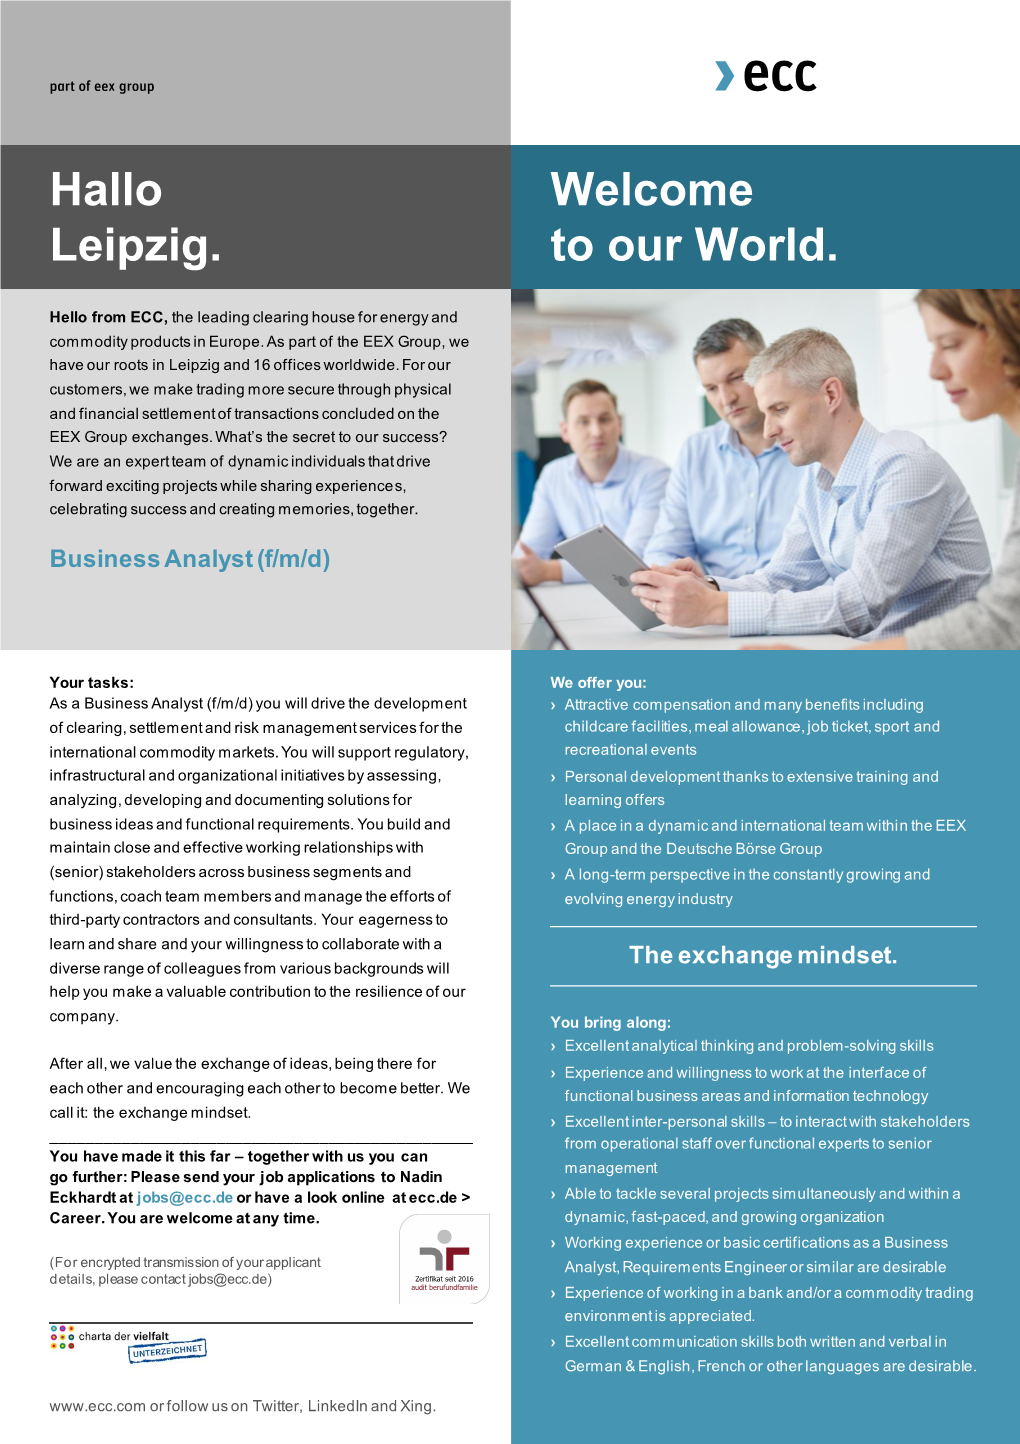 Business Analyst (F/M/D)